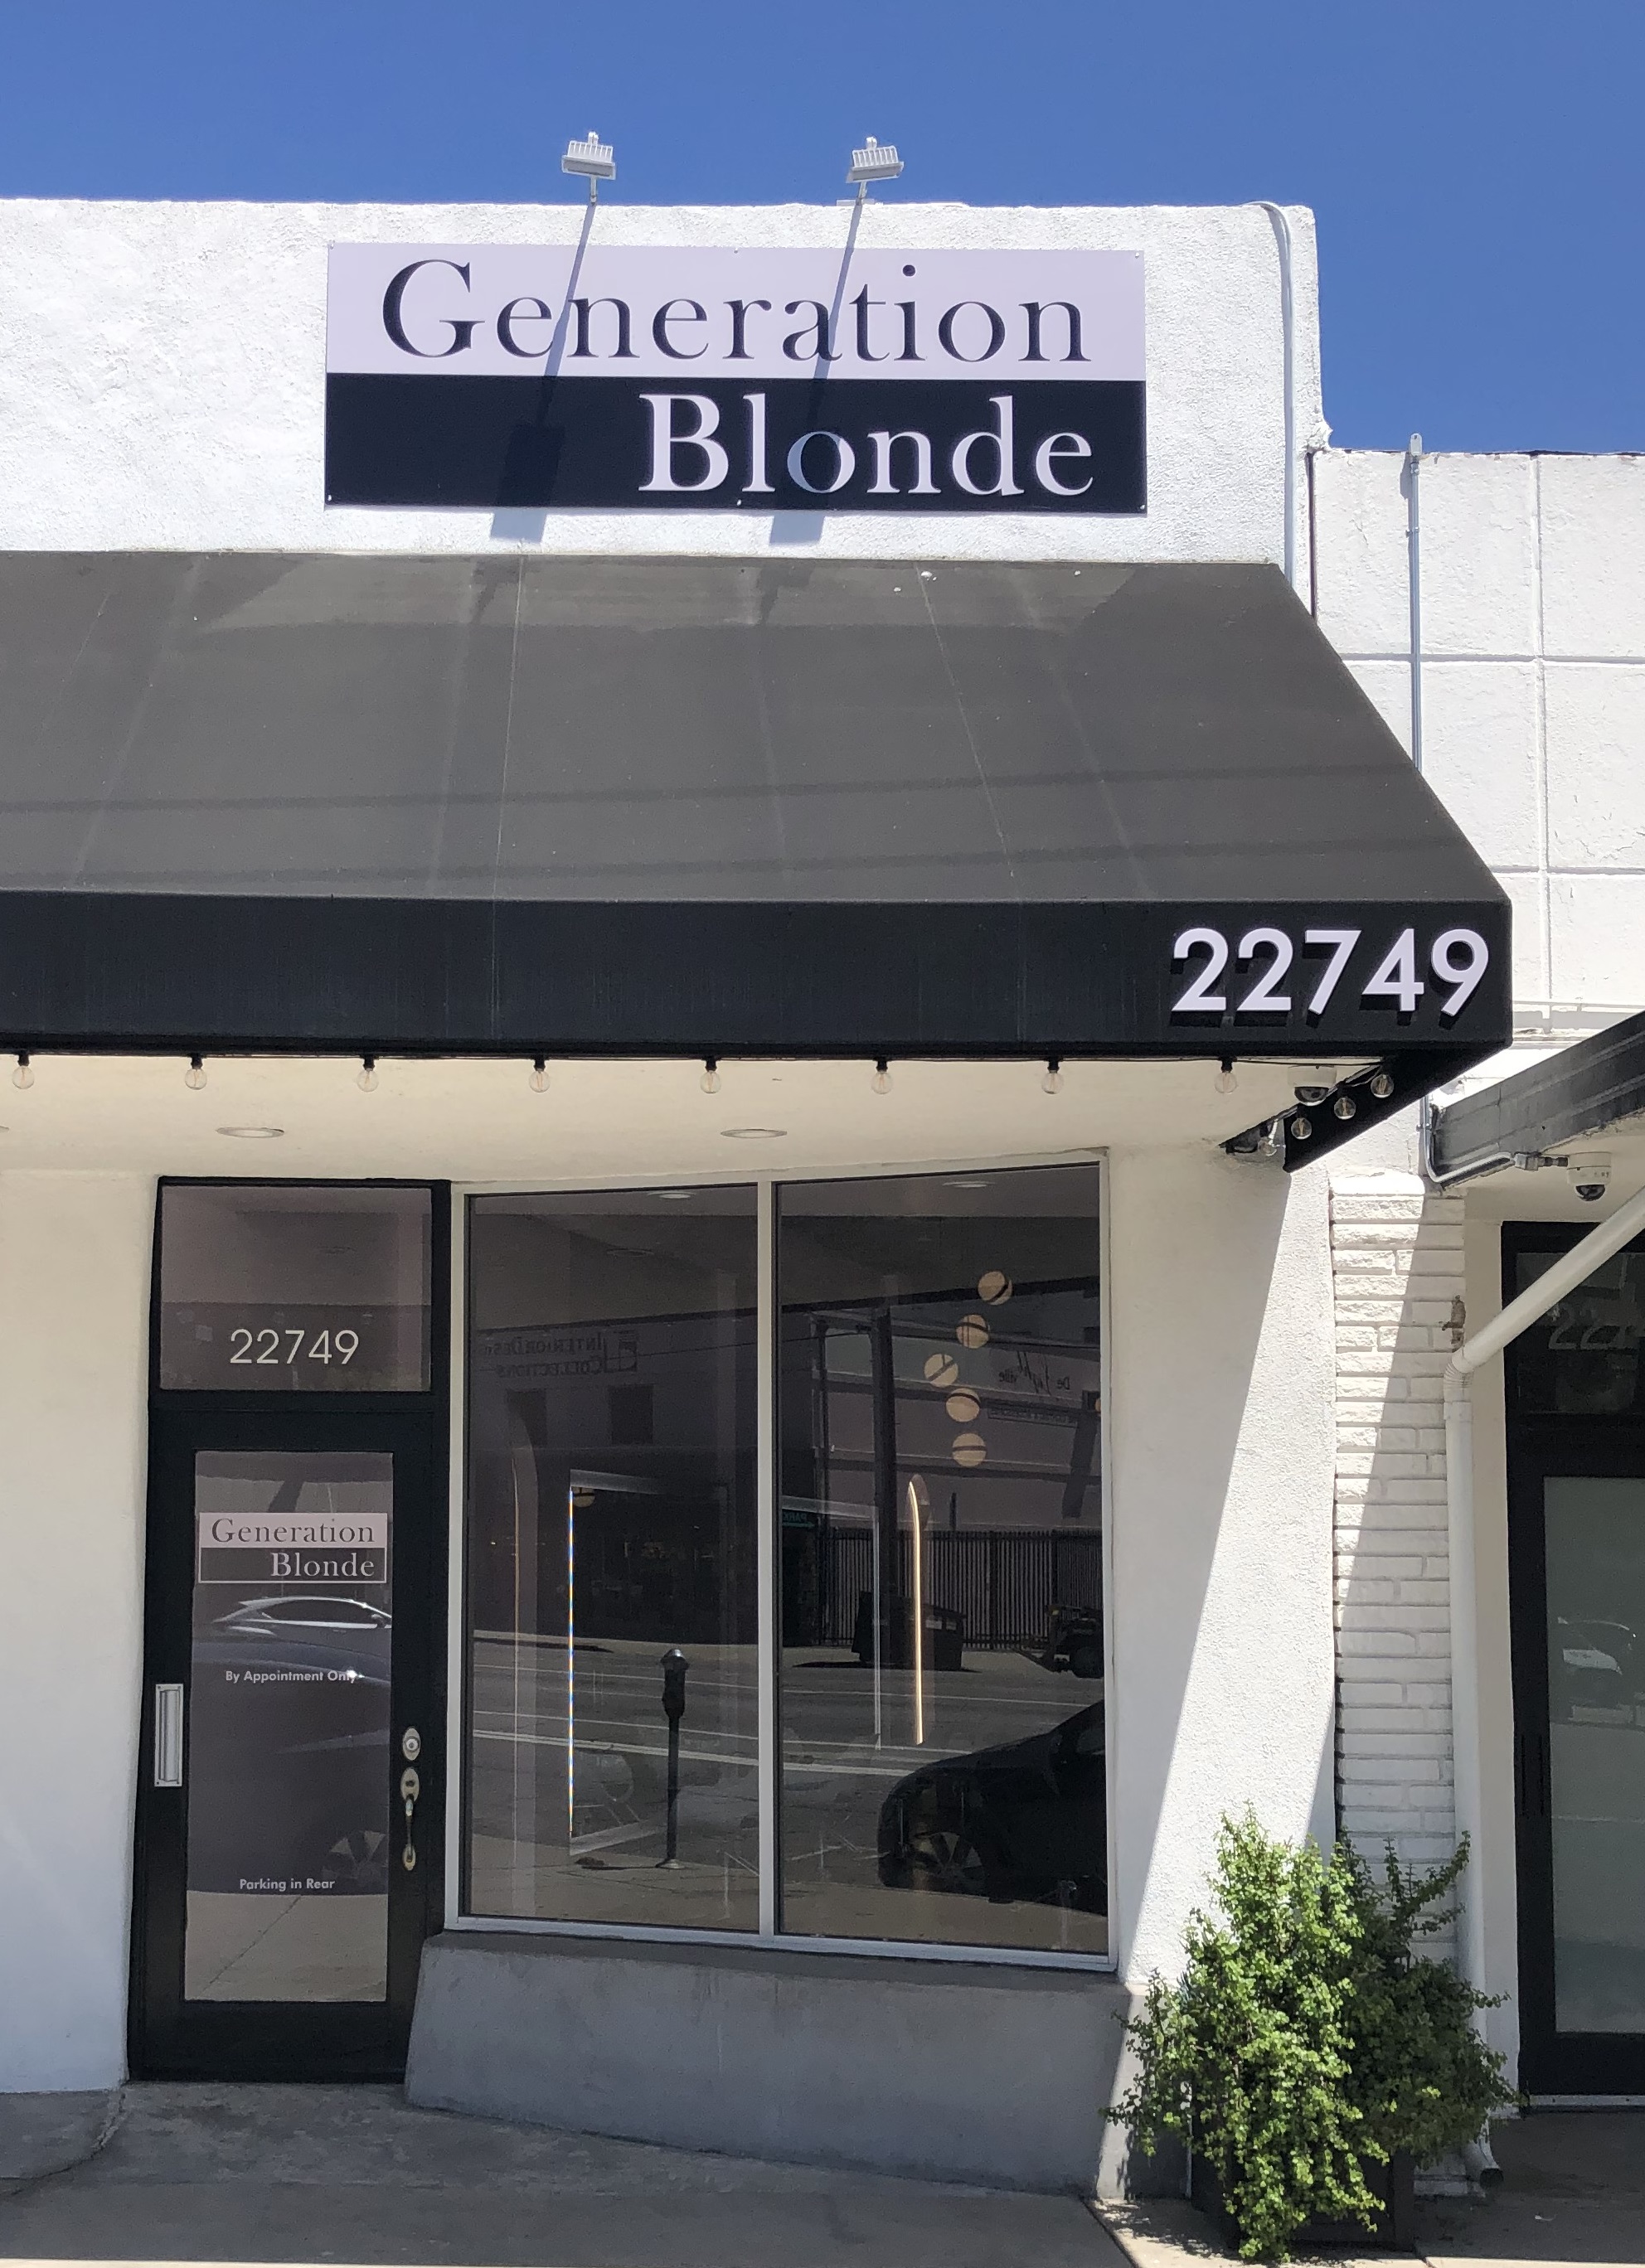 The custom storefront sign we made for the storefront of Generation Blonde in Woodland Hills as part of a larger business sign package.